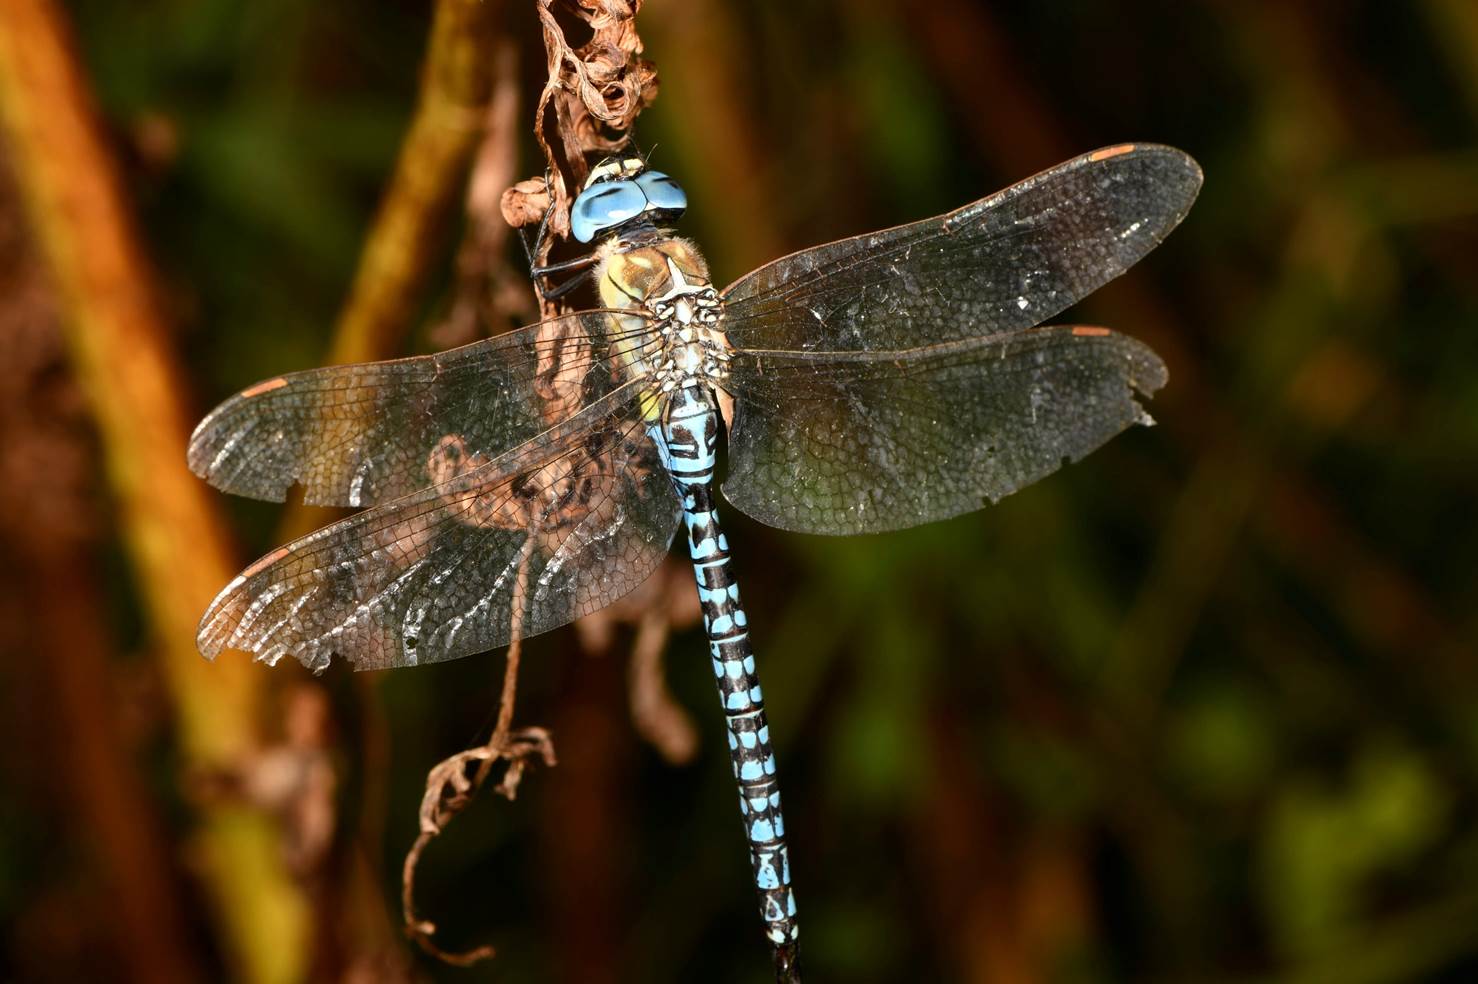 A dragonfly with transparent wings

Description automatically generated